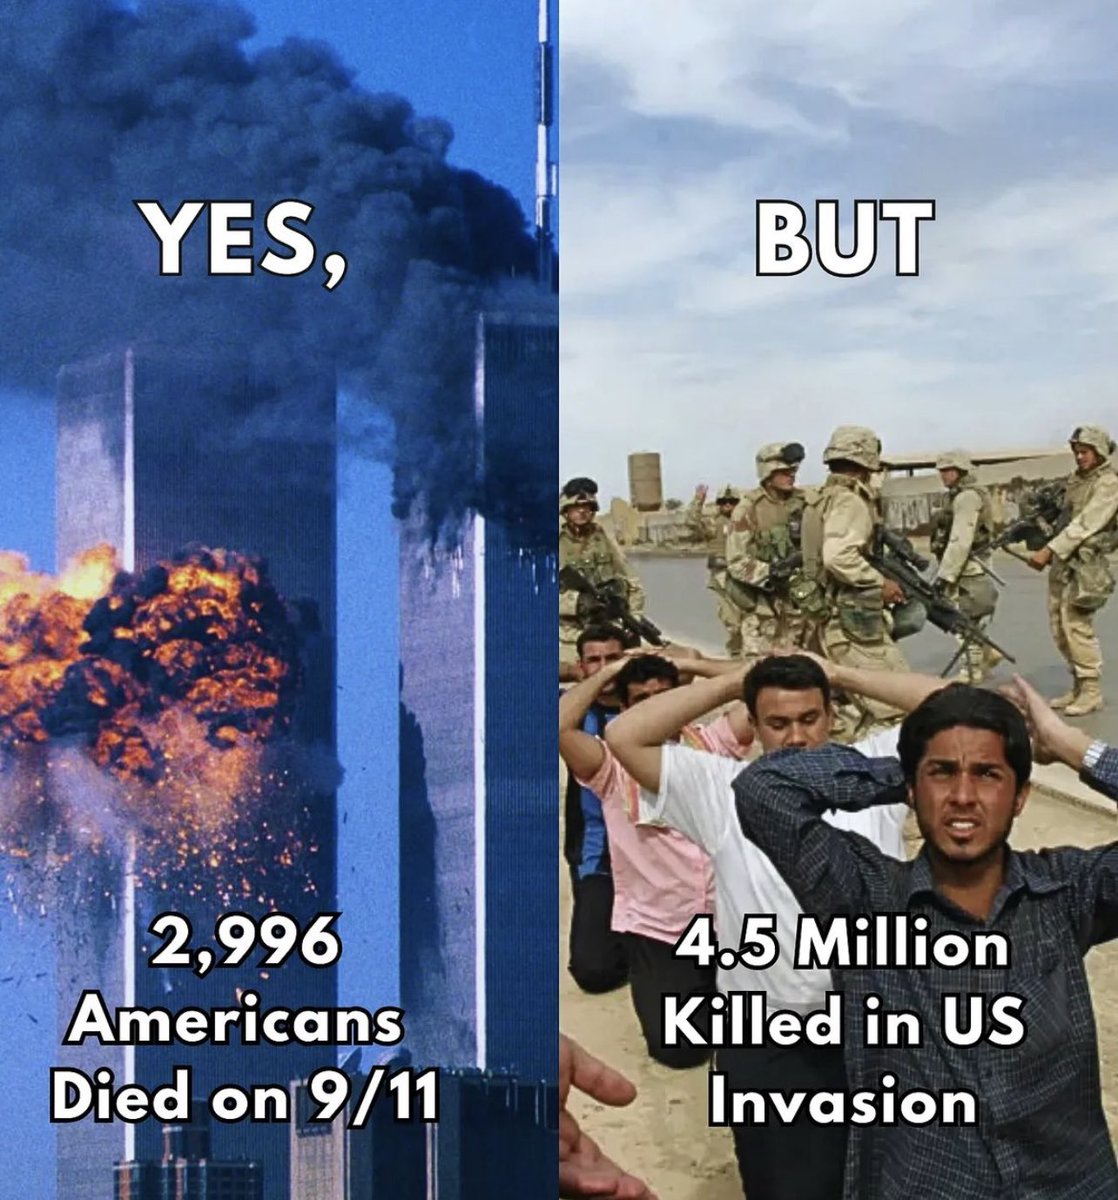 The biggest victim of 9/11 is the Muslim world. 

Millions of innocent slaughtered & to this day, western wars, occupation, racist discrimination and dehumanisation still persist. 

The world's biggest terrorists aren't Al Qaeda - it's America!

#911NeverForget #911Truth